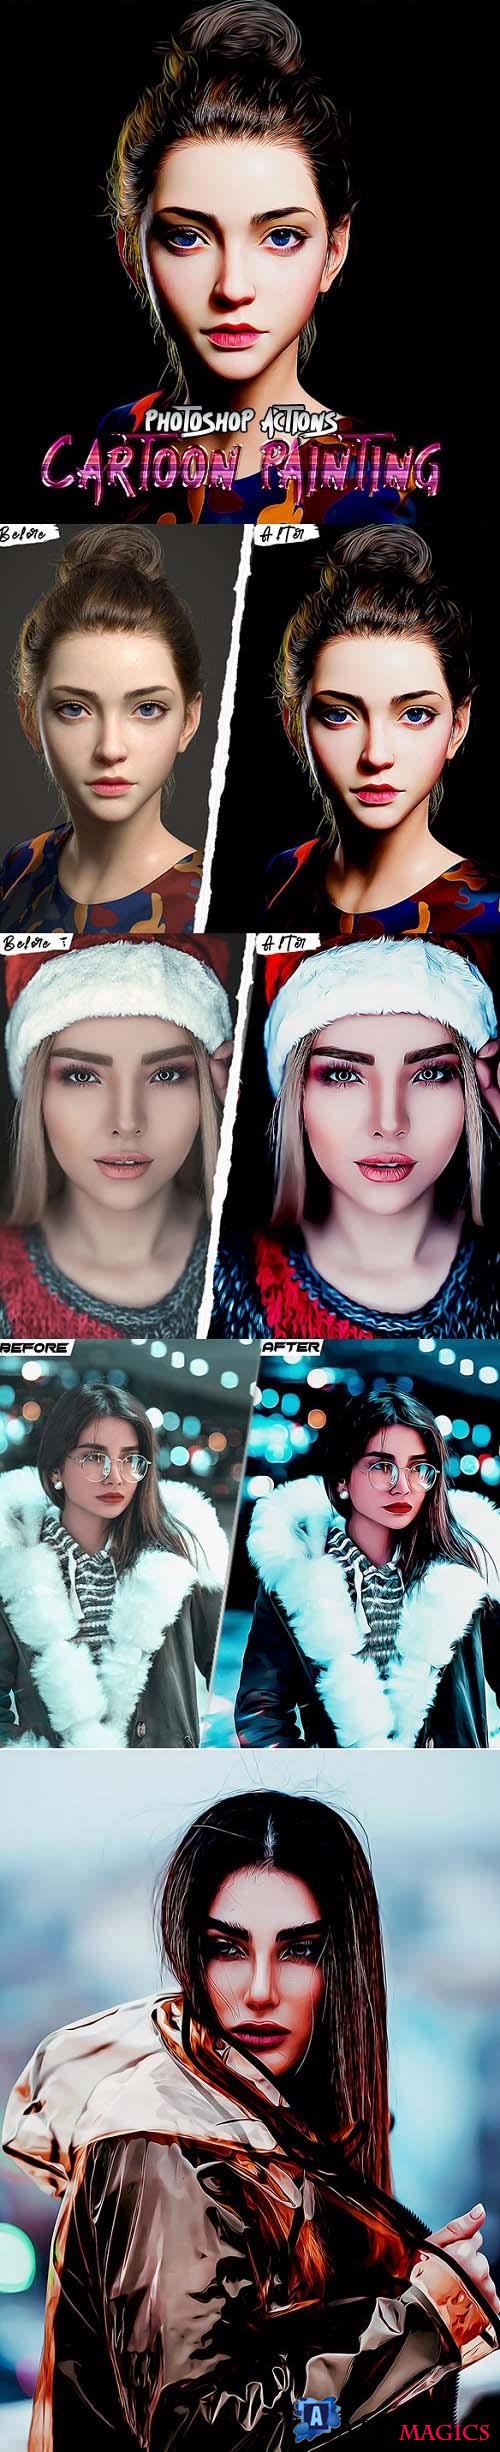 Cartoon Painting - Christmas Photoshop Actions - 35139694